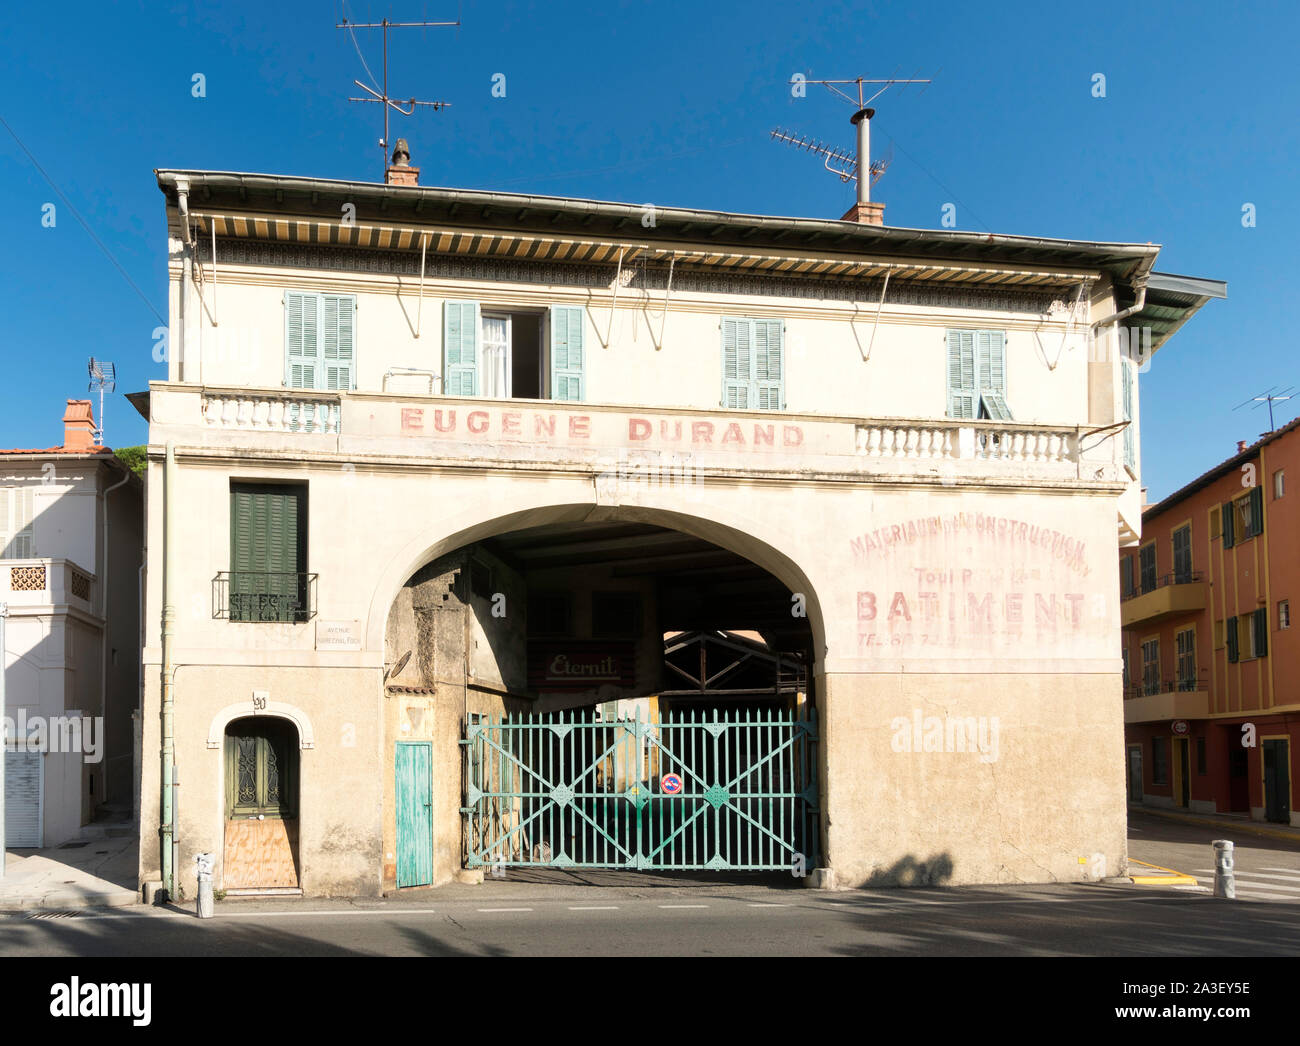 Builder's merchant housed in early 20th century building in Villefranche sur Mer, France, Europe Stock Photo